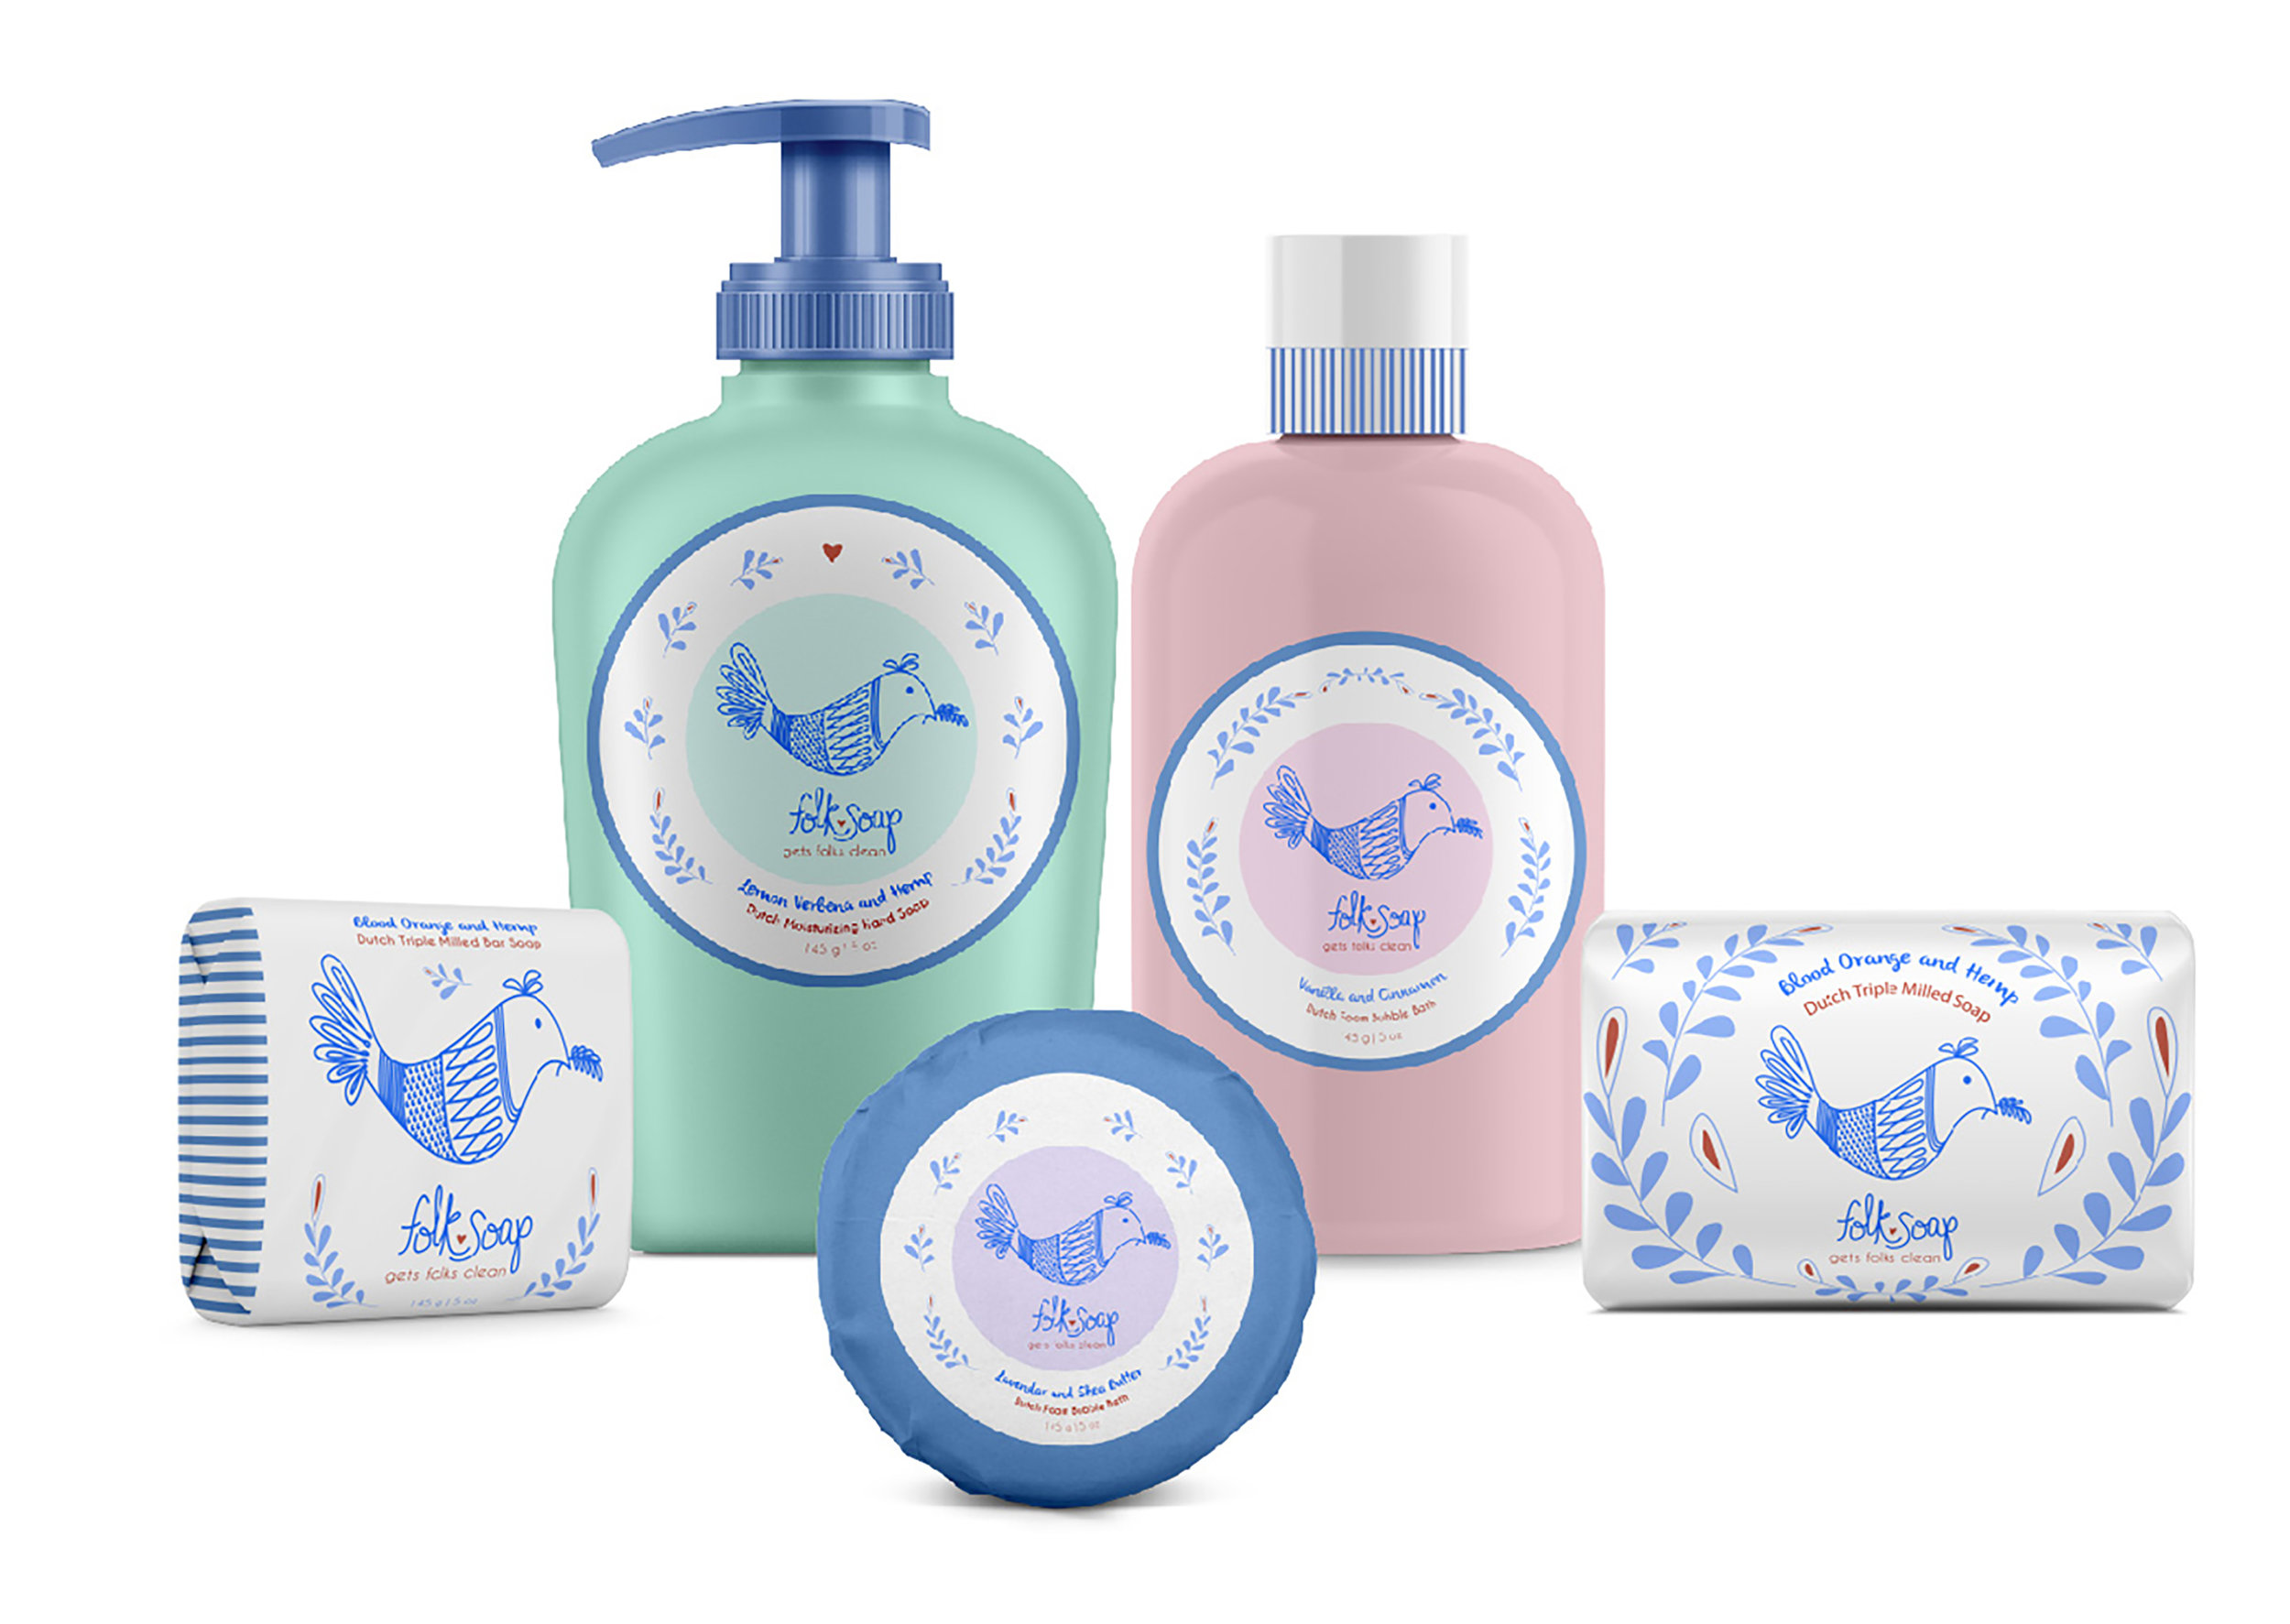 Skincare Company Based in the Netherlands Create Soap Packaging Concept for US Market